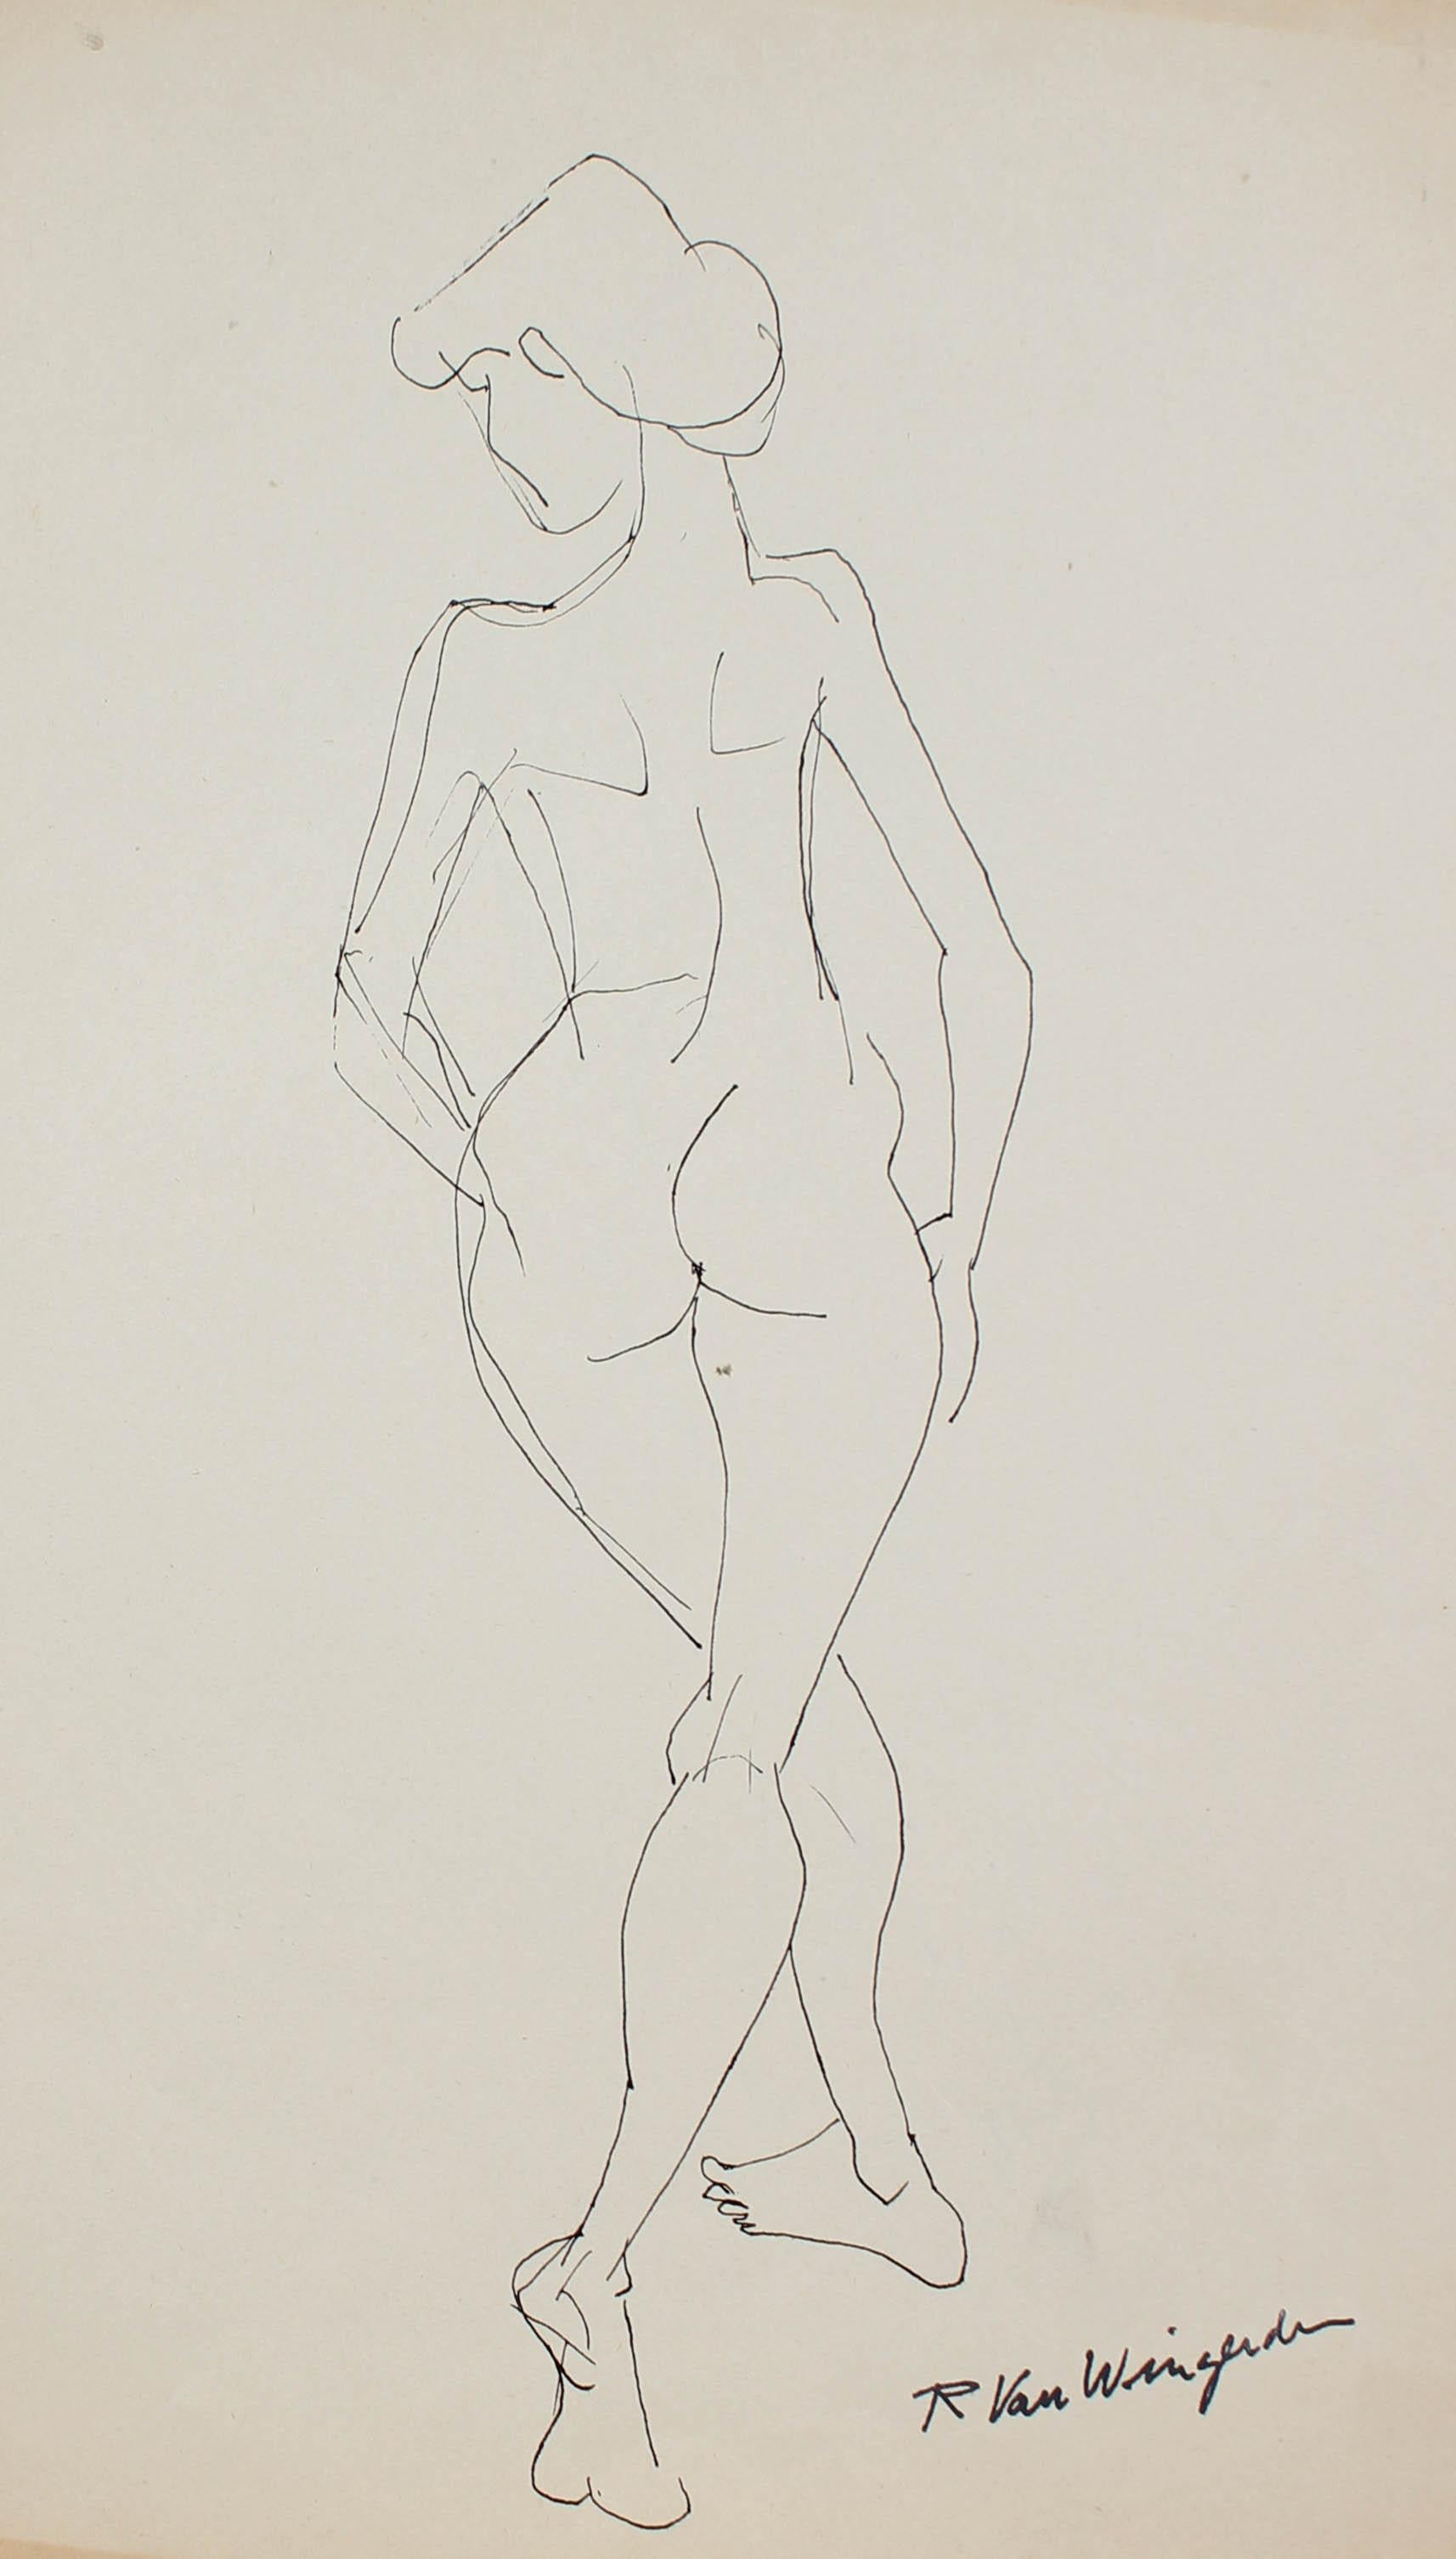 Expressionist Female Figure in Ink, Mid 20th Century